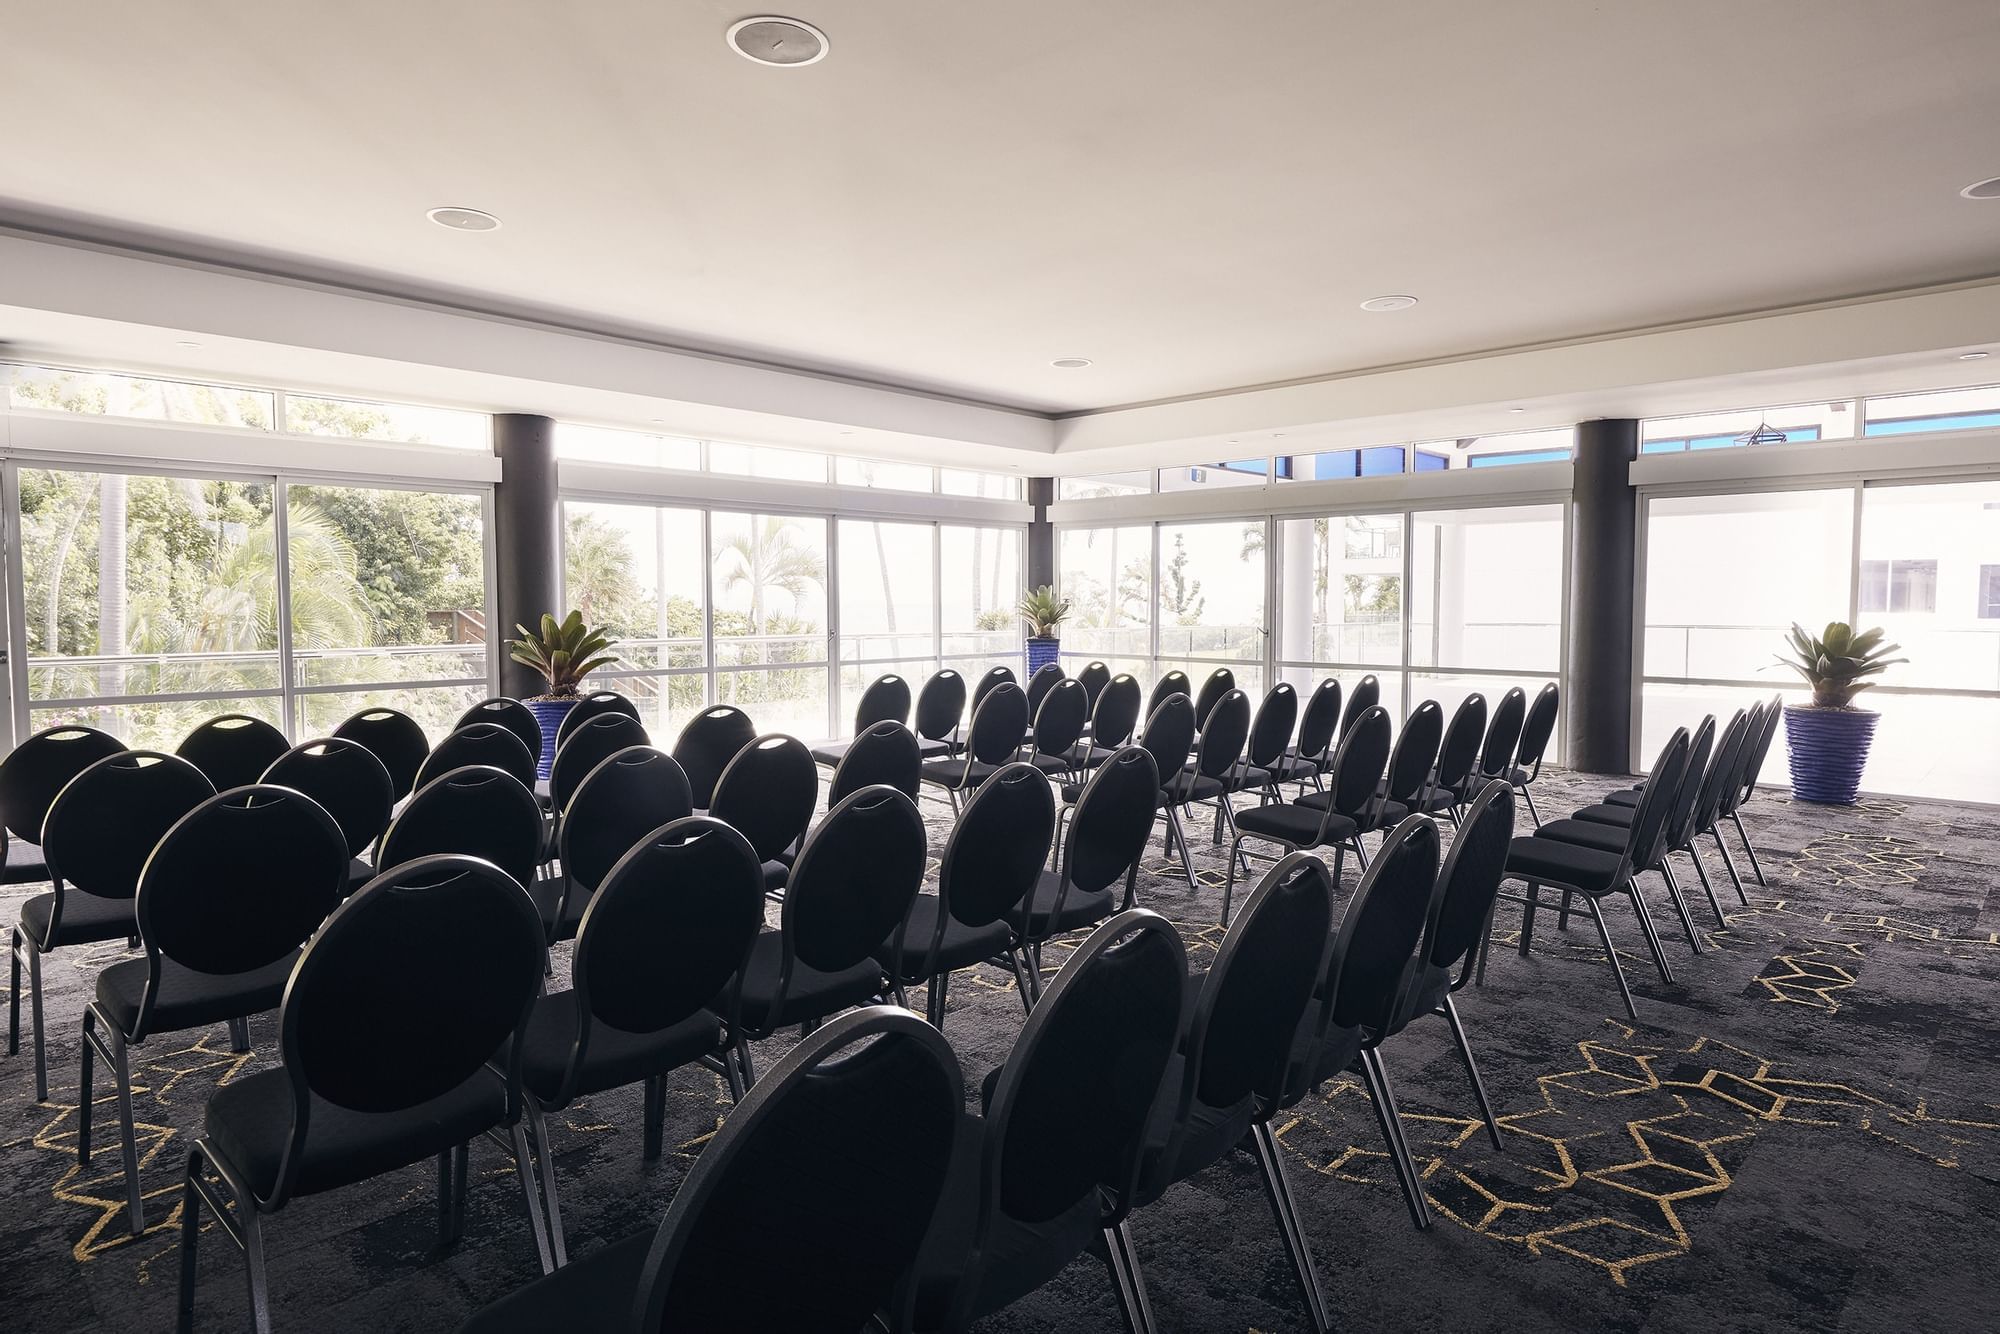 Chair setup for event at Eclipse room at Daydream Island Resort